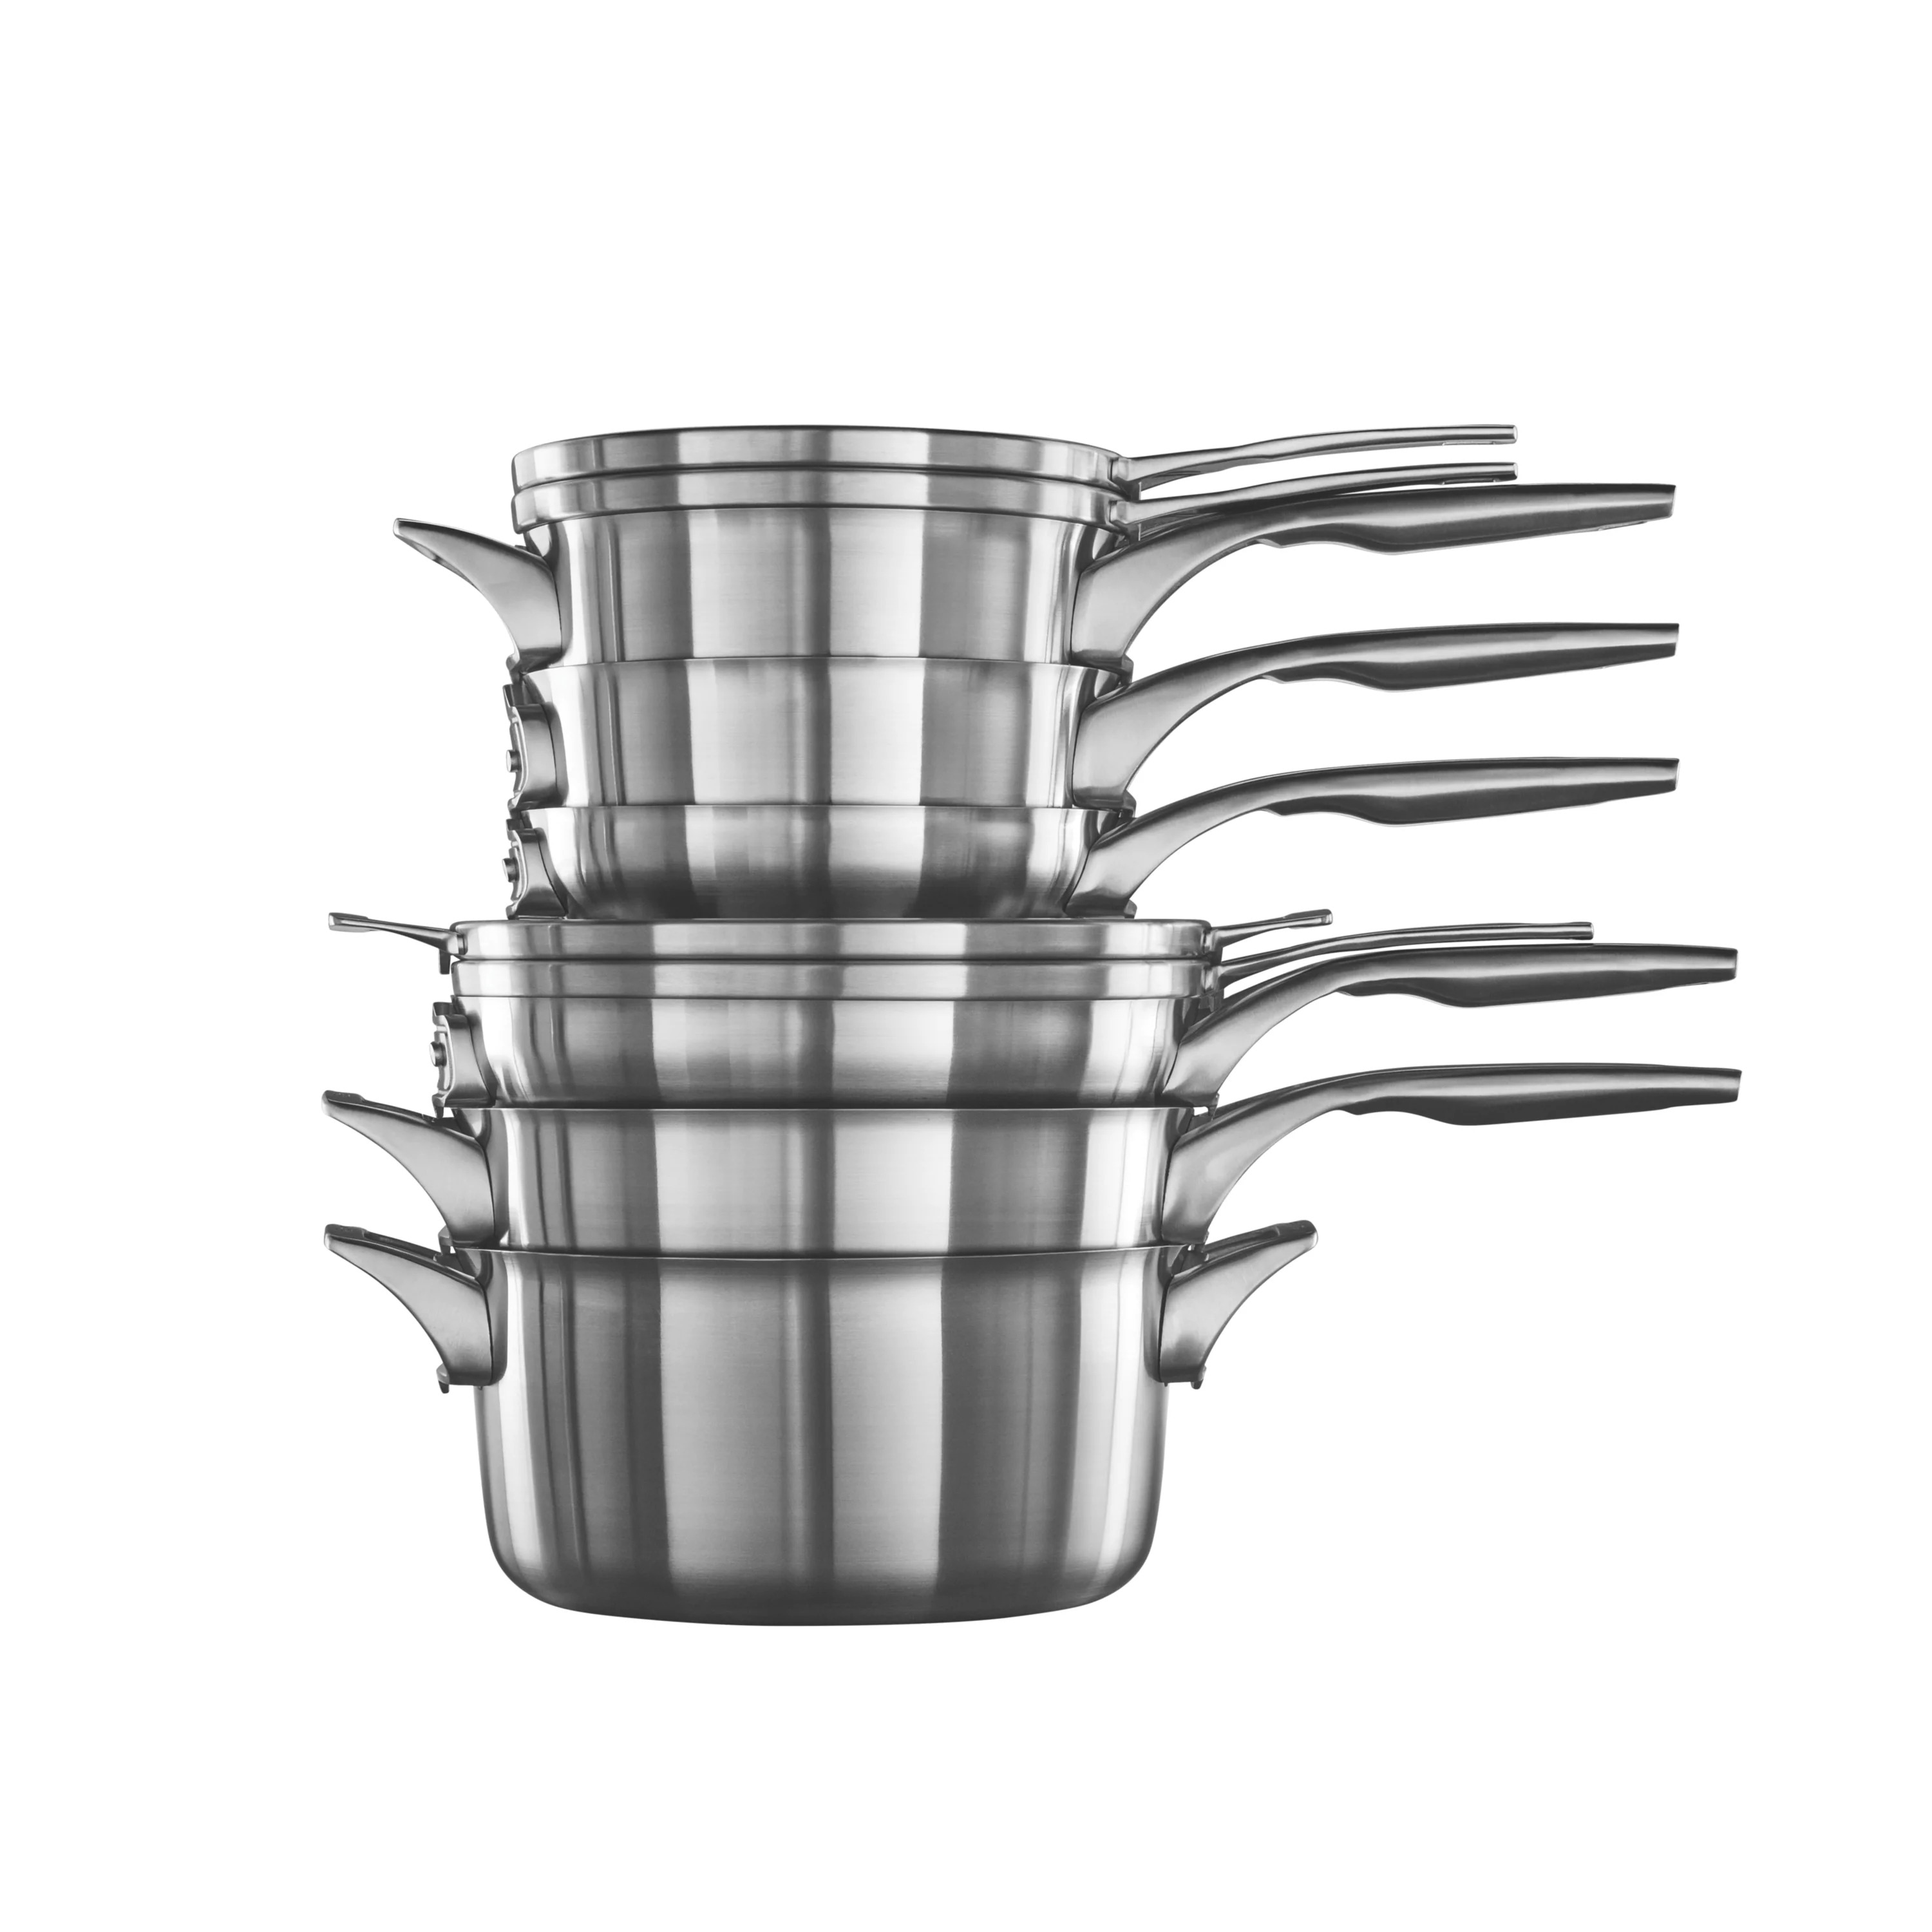 https://ak1.ostkcdn.com/images/products/is/images/direct/61b0e84e26a8781fc47ec8fafa11f9009468475f/Calphalon-Premier-Space-Saving-Stainless-Steel-10-Piece-Cookware-Set.jpg